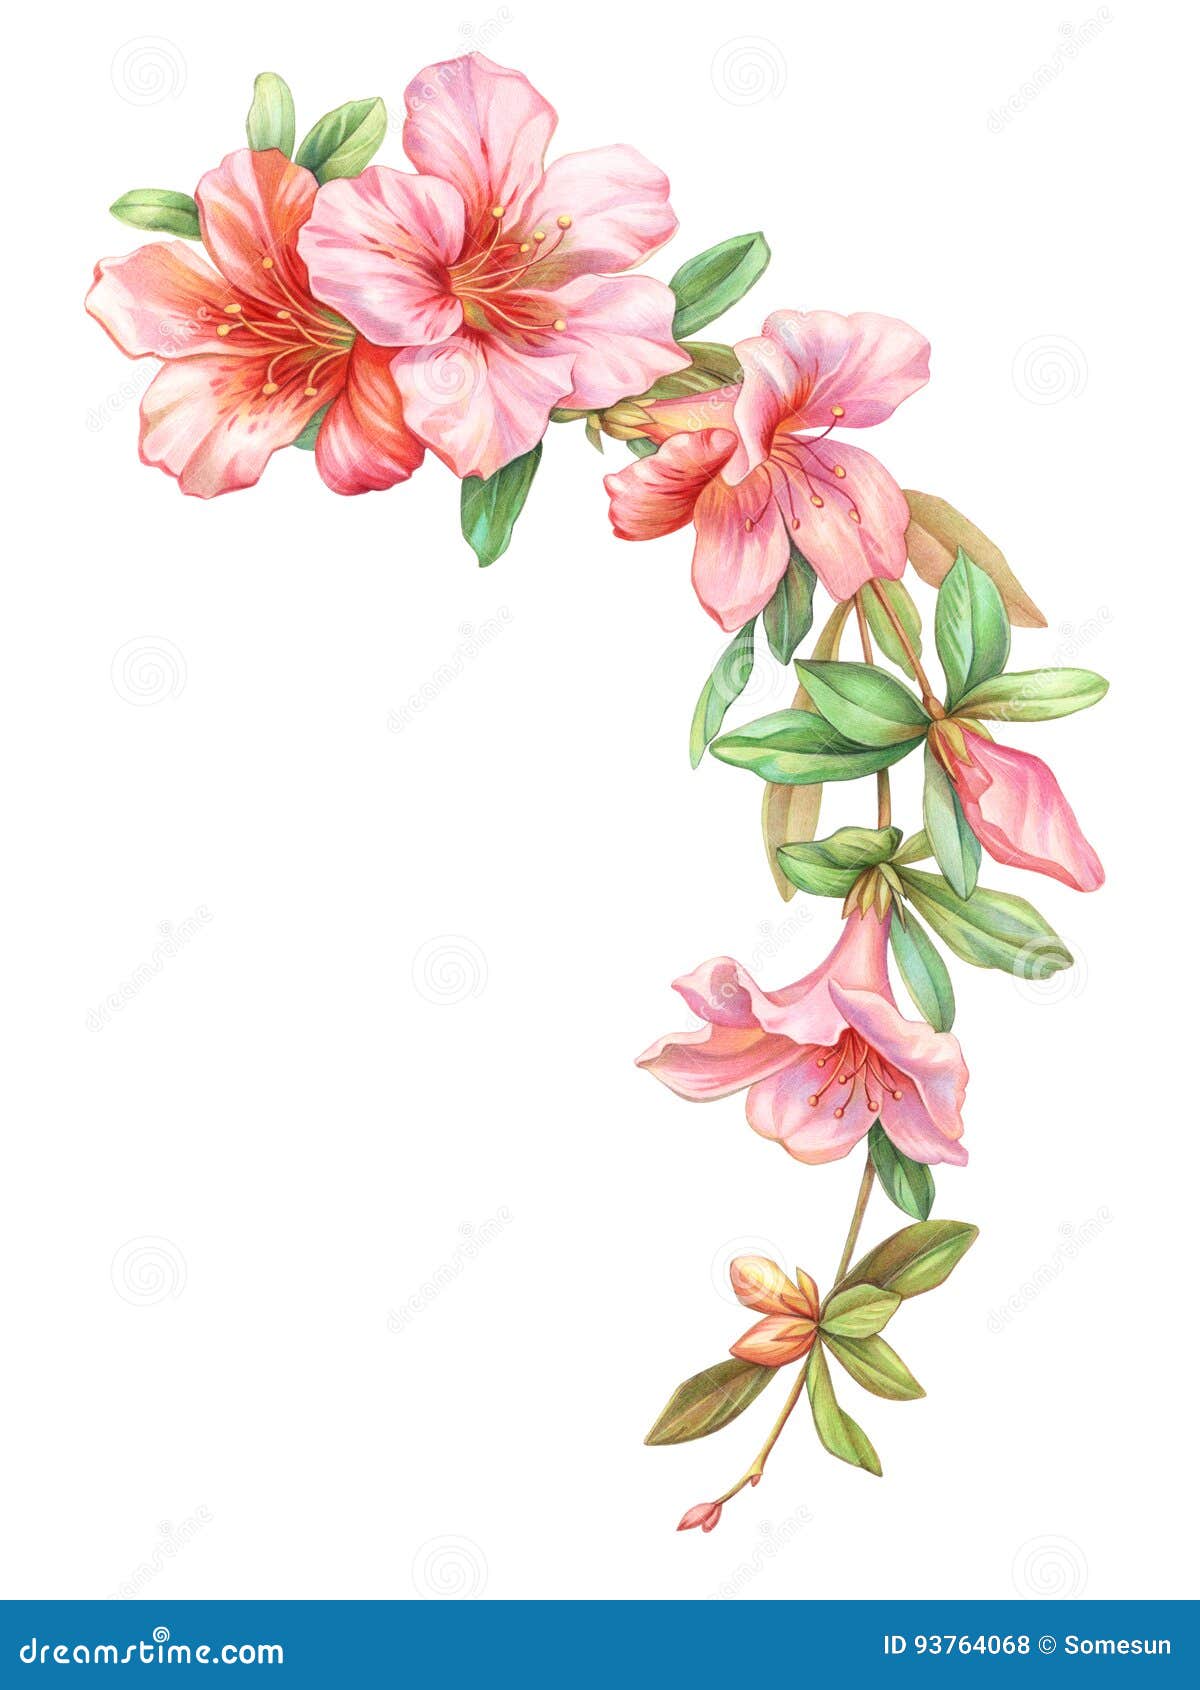 pink white rose vintage azalea flowers garland wreath  on white background. colored pencil watercolor .